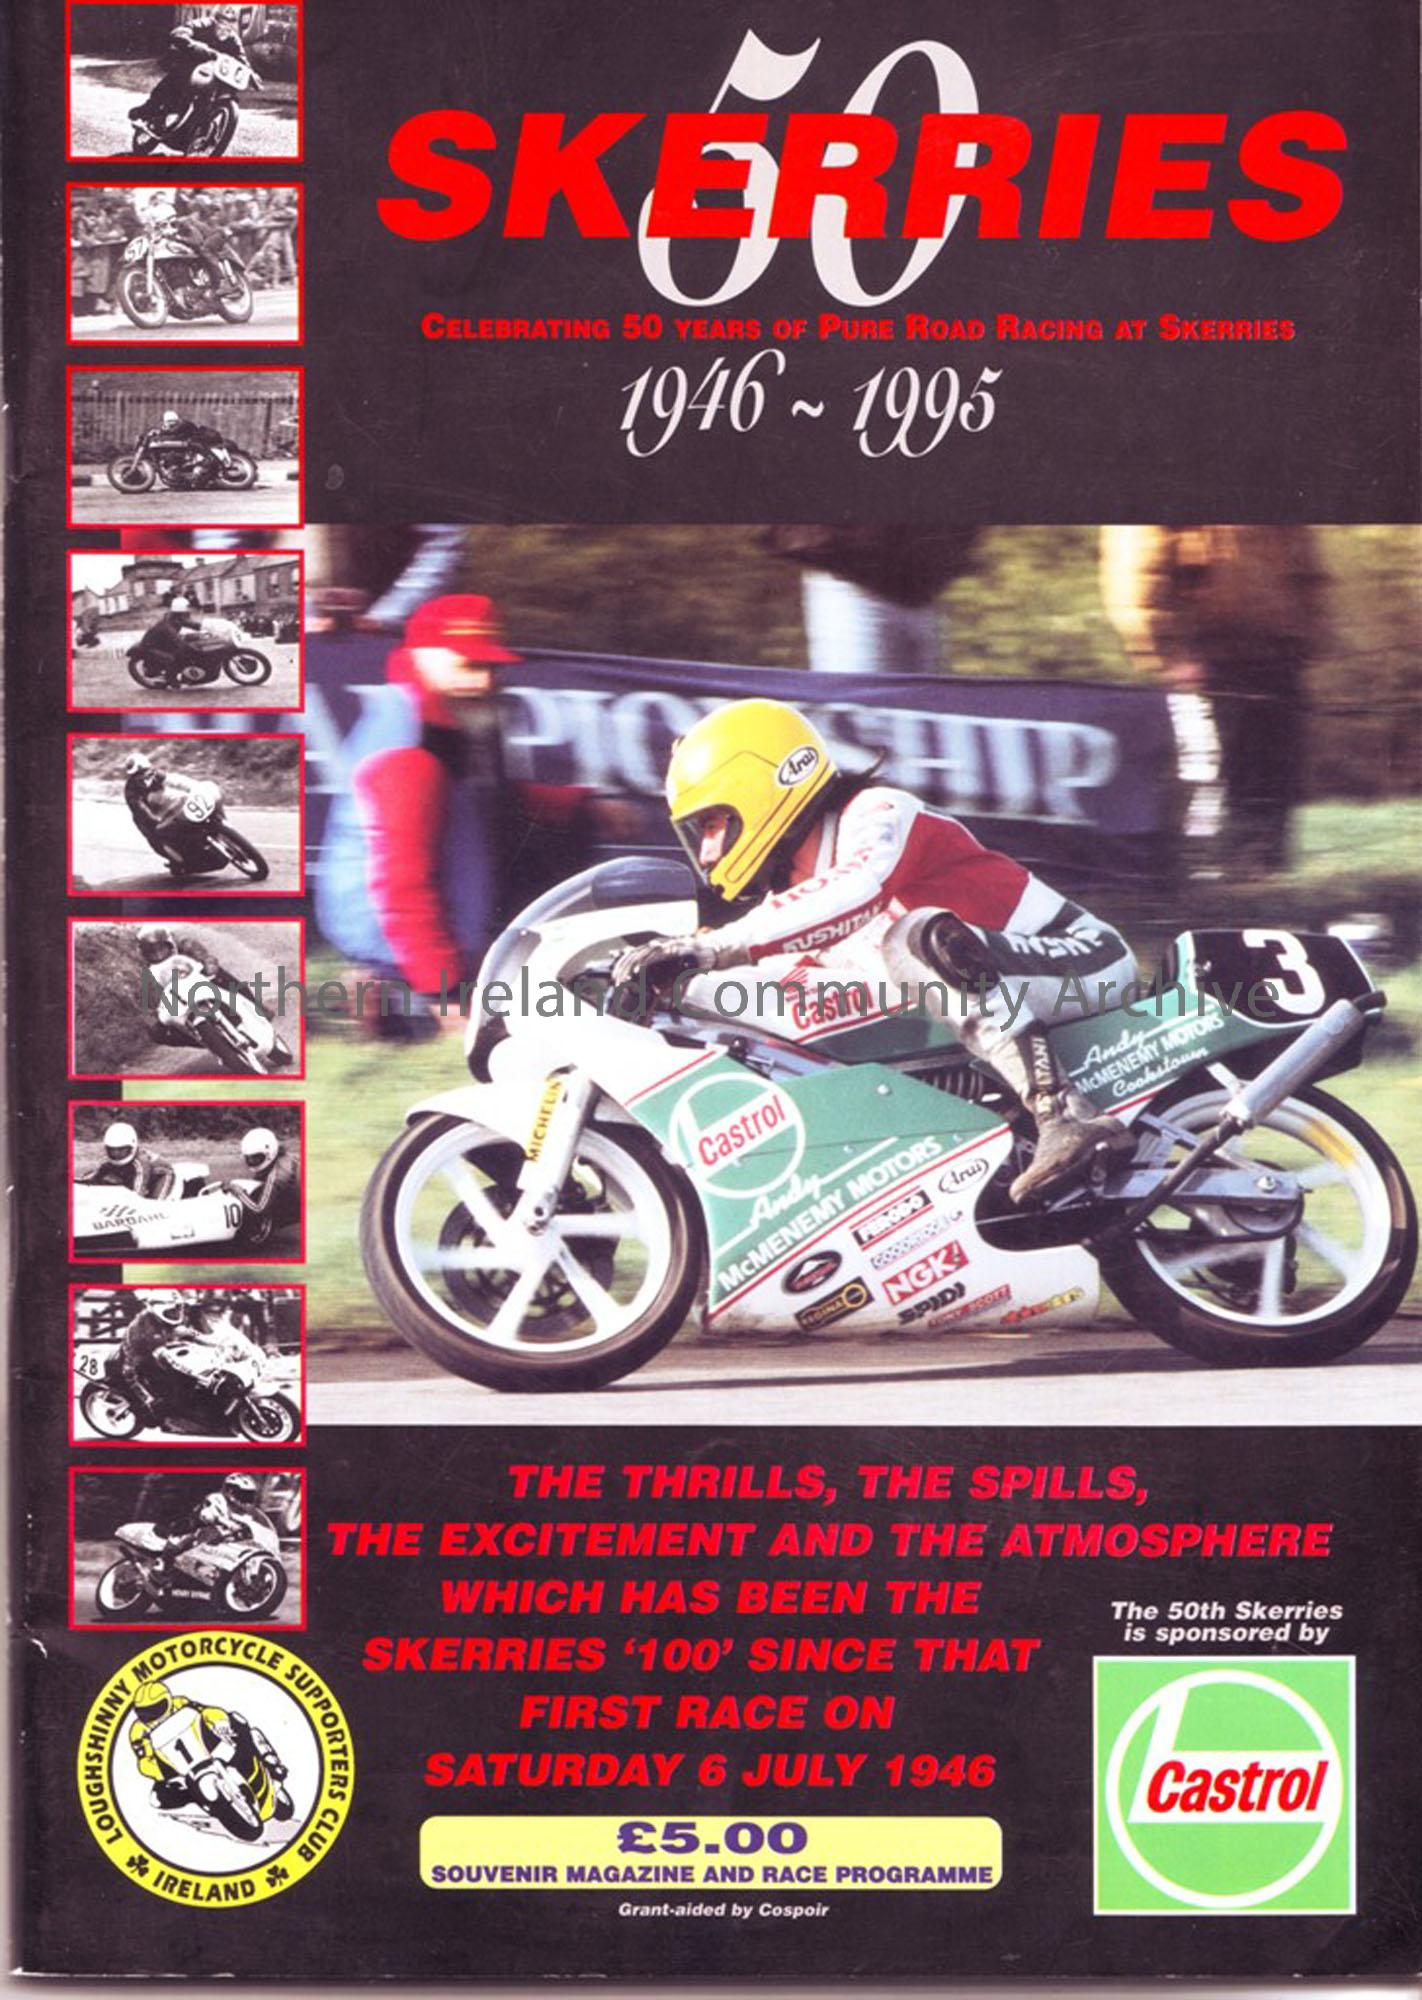 Skerries, celebrating 50 years of Pure Road racing at Skerries souvenir magazine and race programme. 1946-1995 Includes lists of Entrants in each clas…